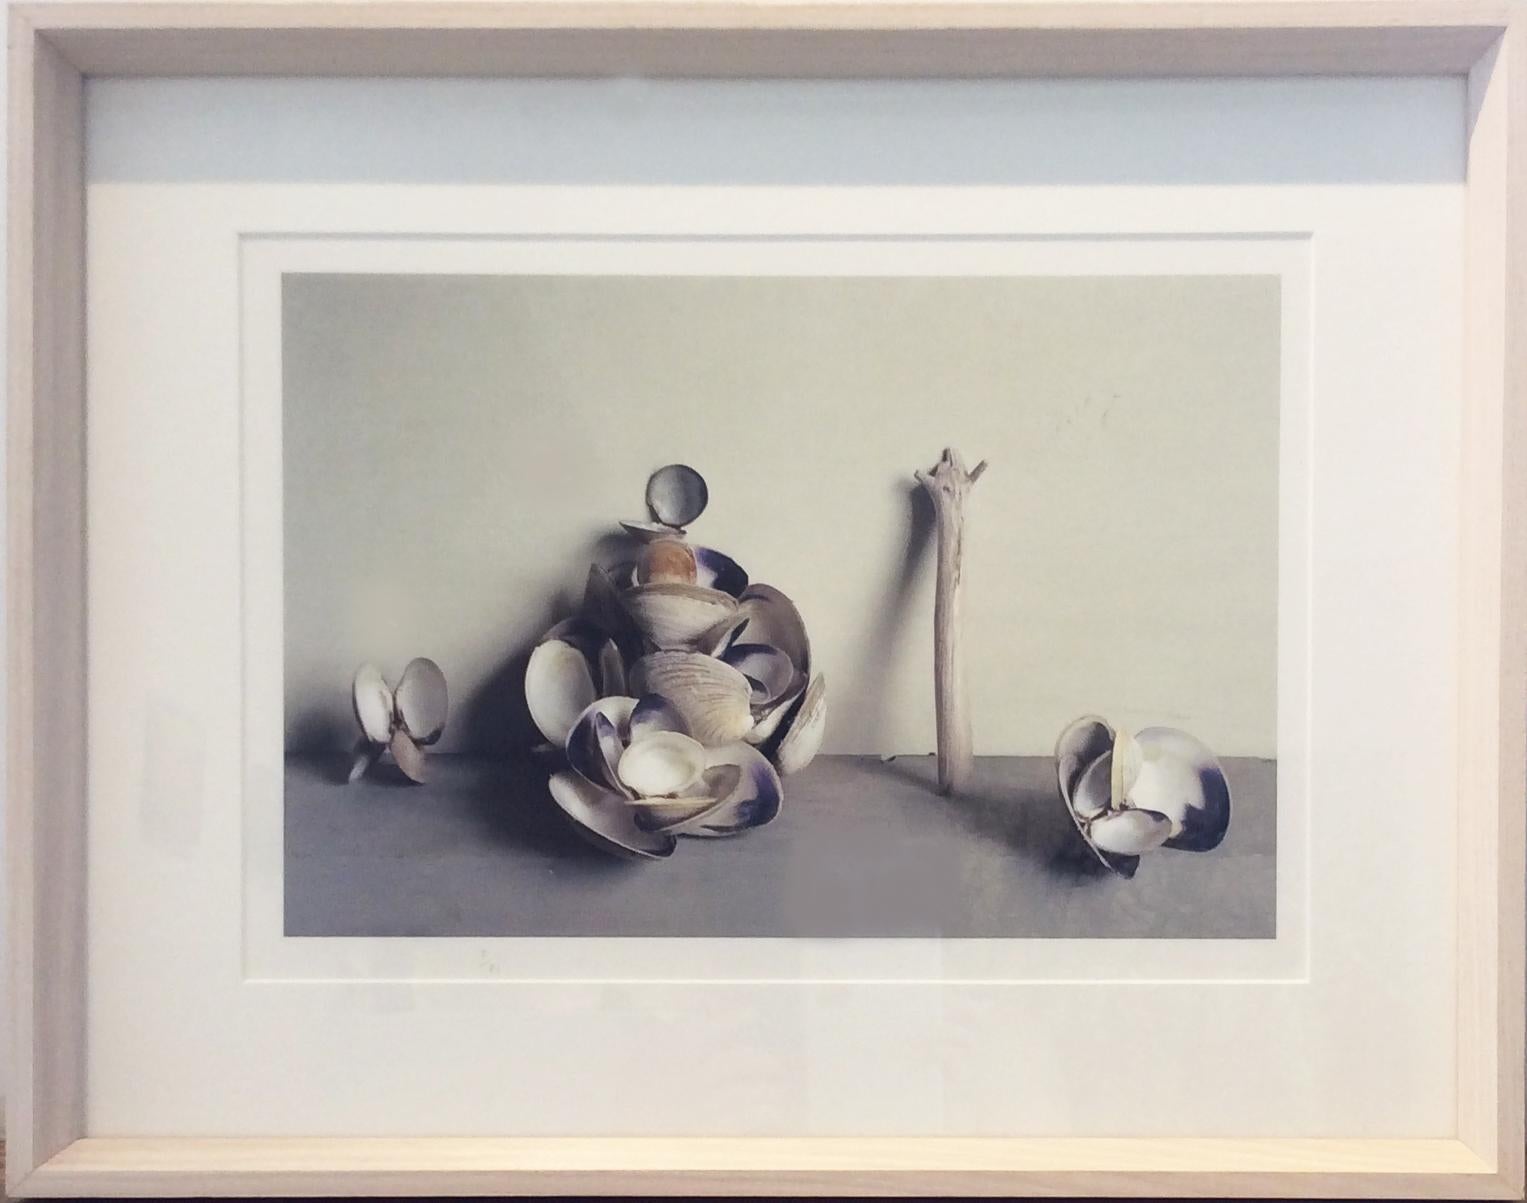 Clam Shells (Framed Still Life Photograph of Blue/White Shells with Drift Wood) - Gray Color Photograph by David Halliday